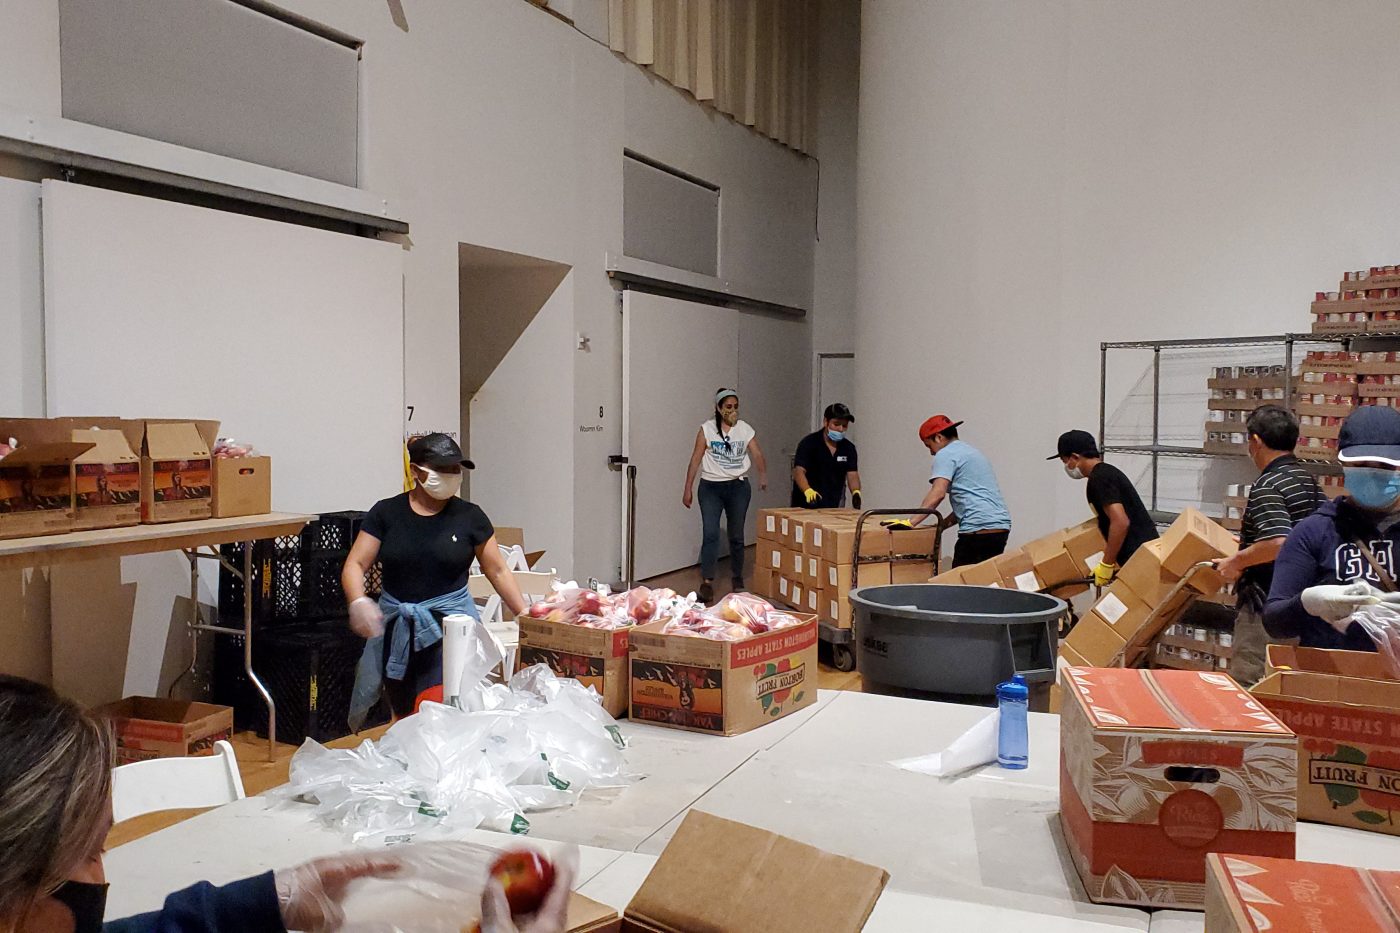 Seven Cultural Food Pantry Volunteers are moving, boxing, and unboxing fresh produce and canned goods inside the Queens Museum.